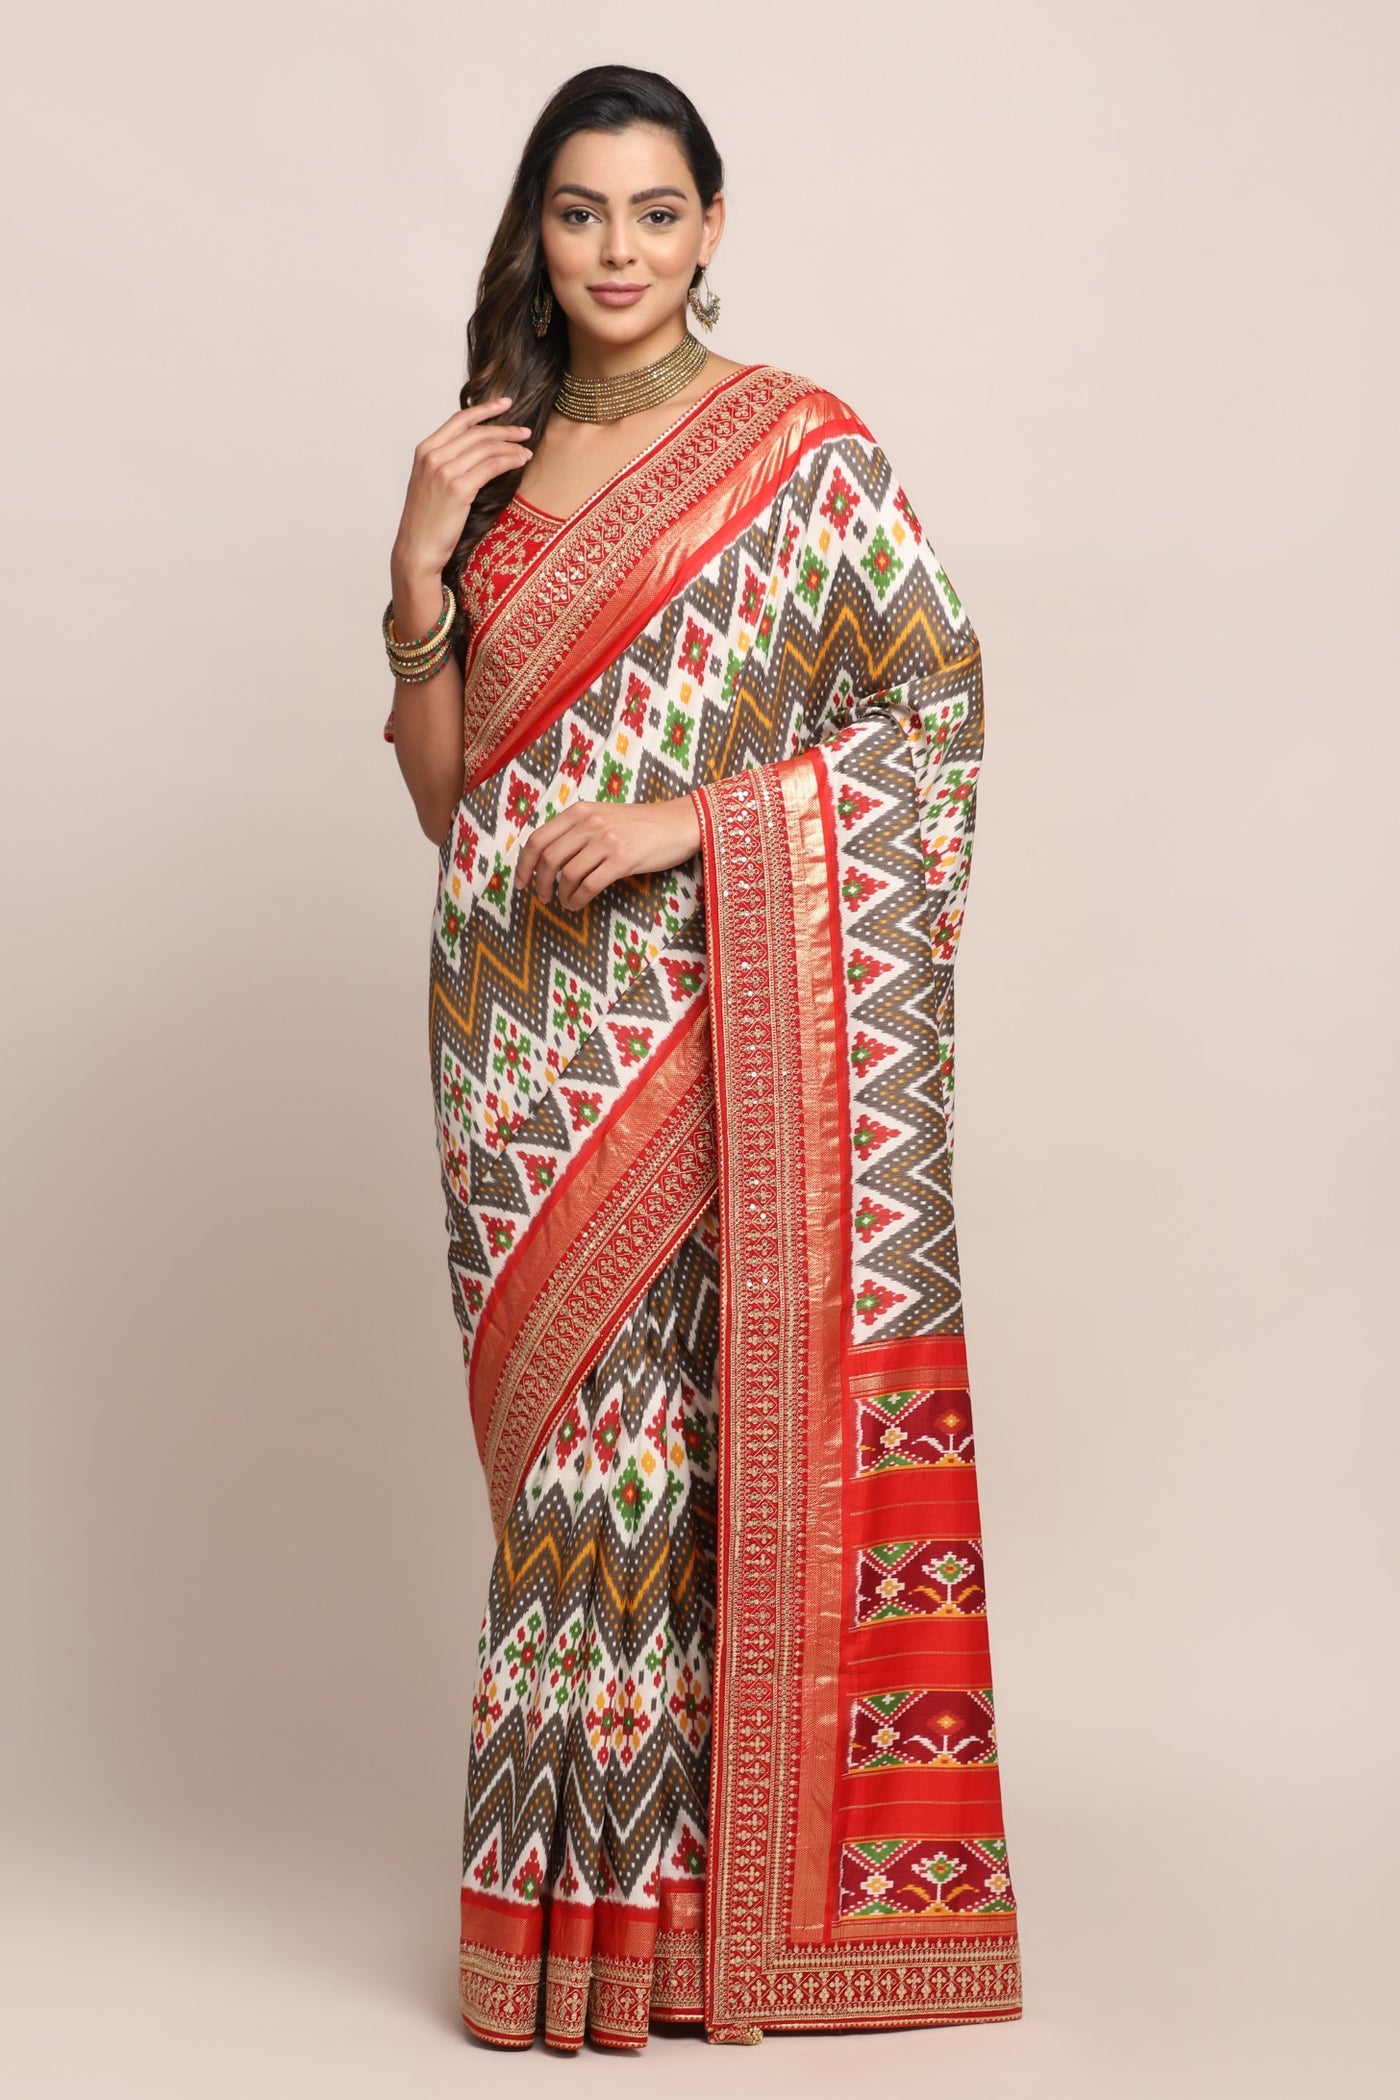 Beautiful red color printed and embroidered saree